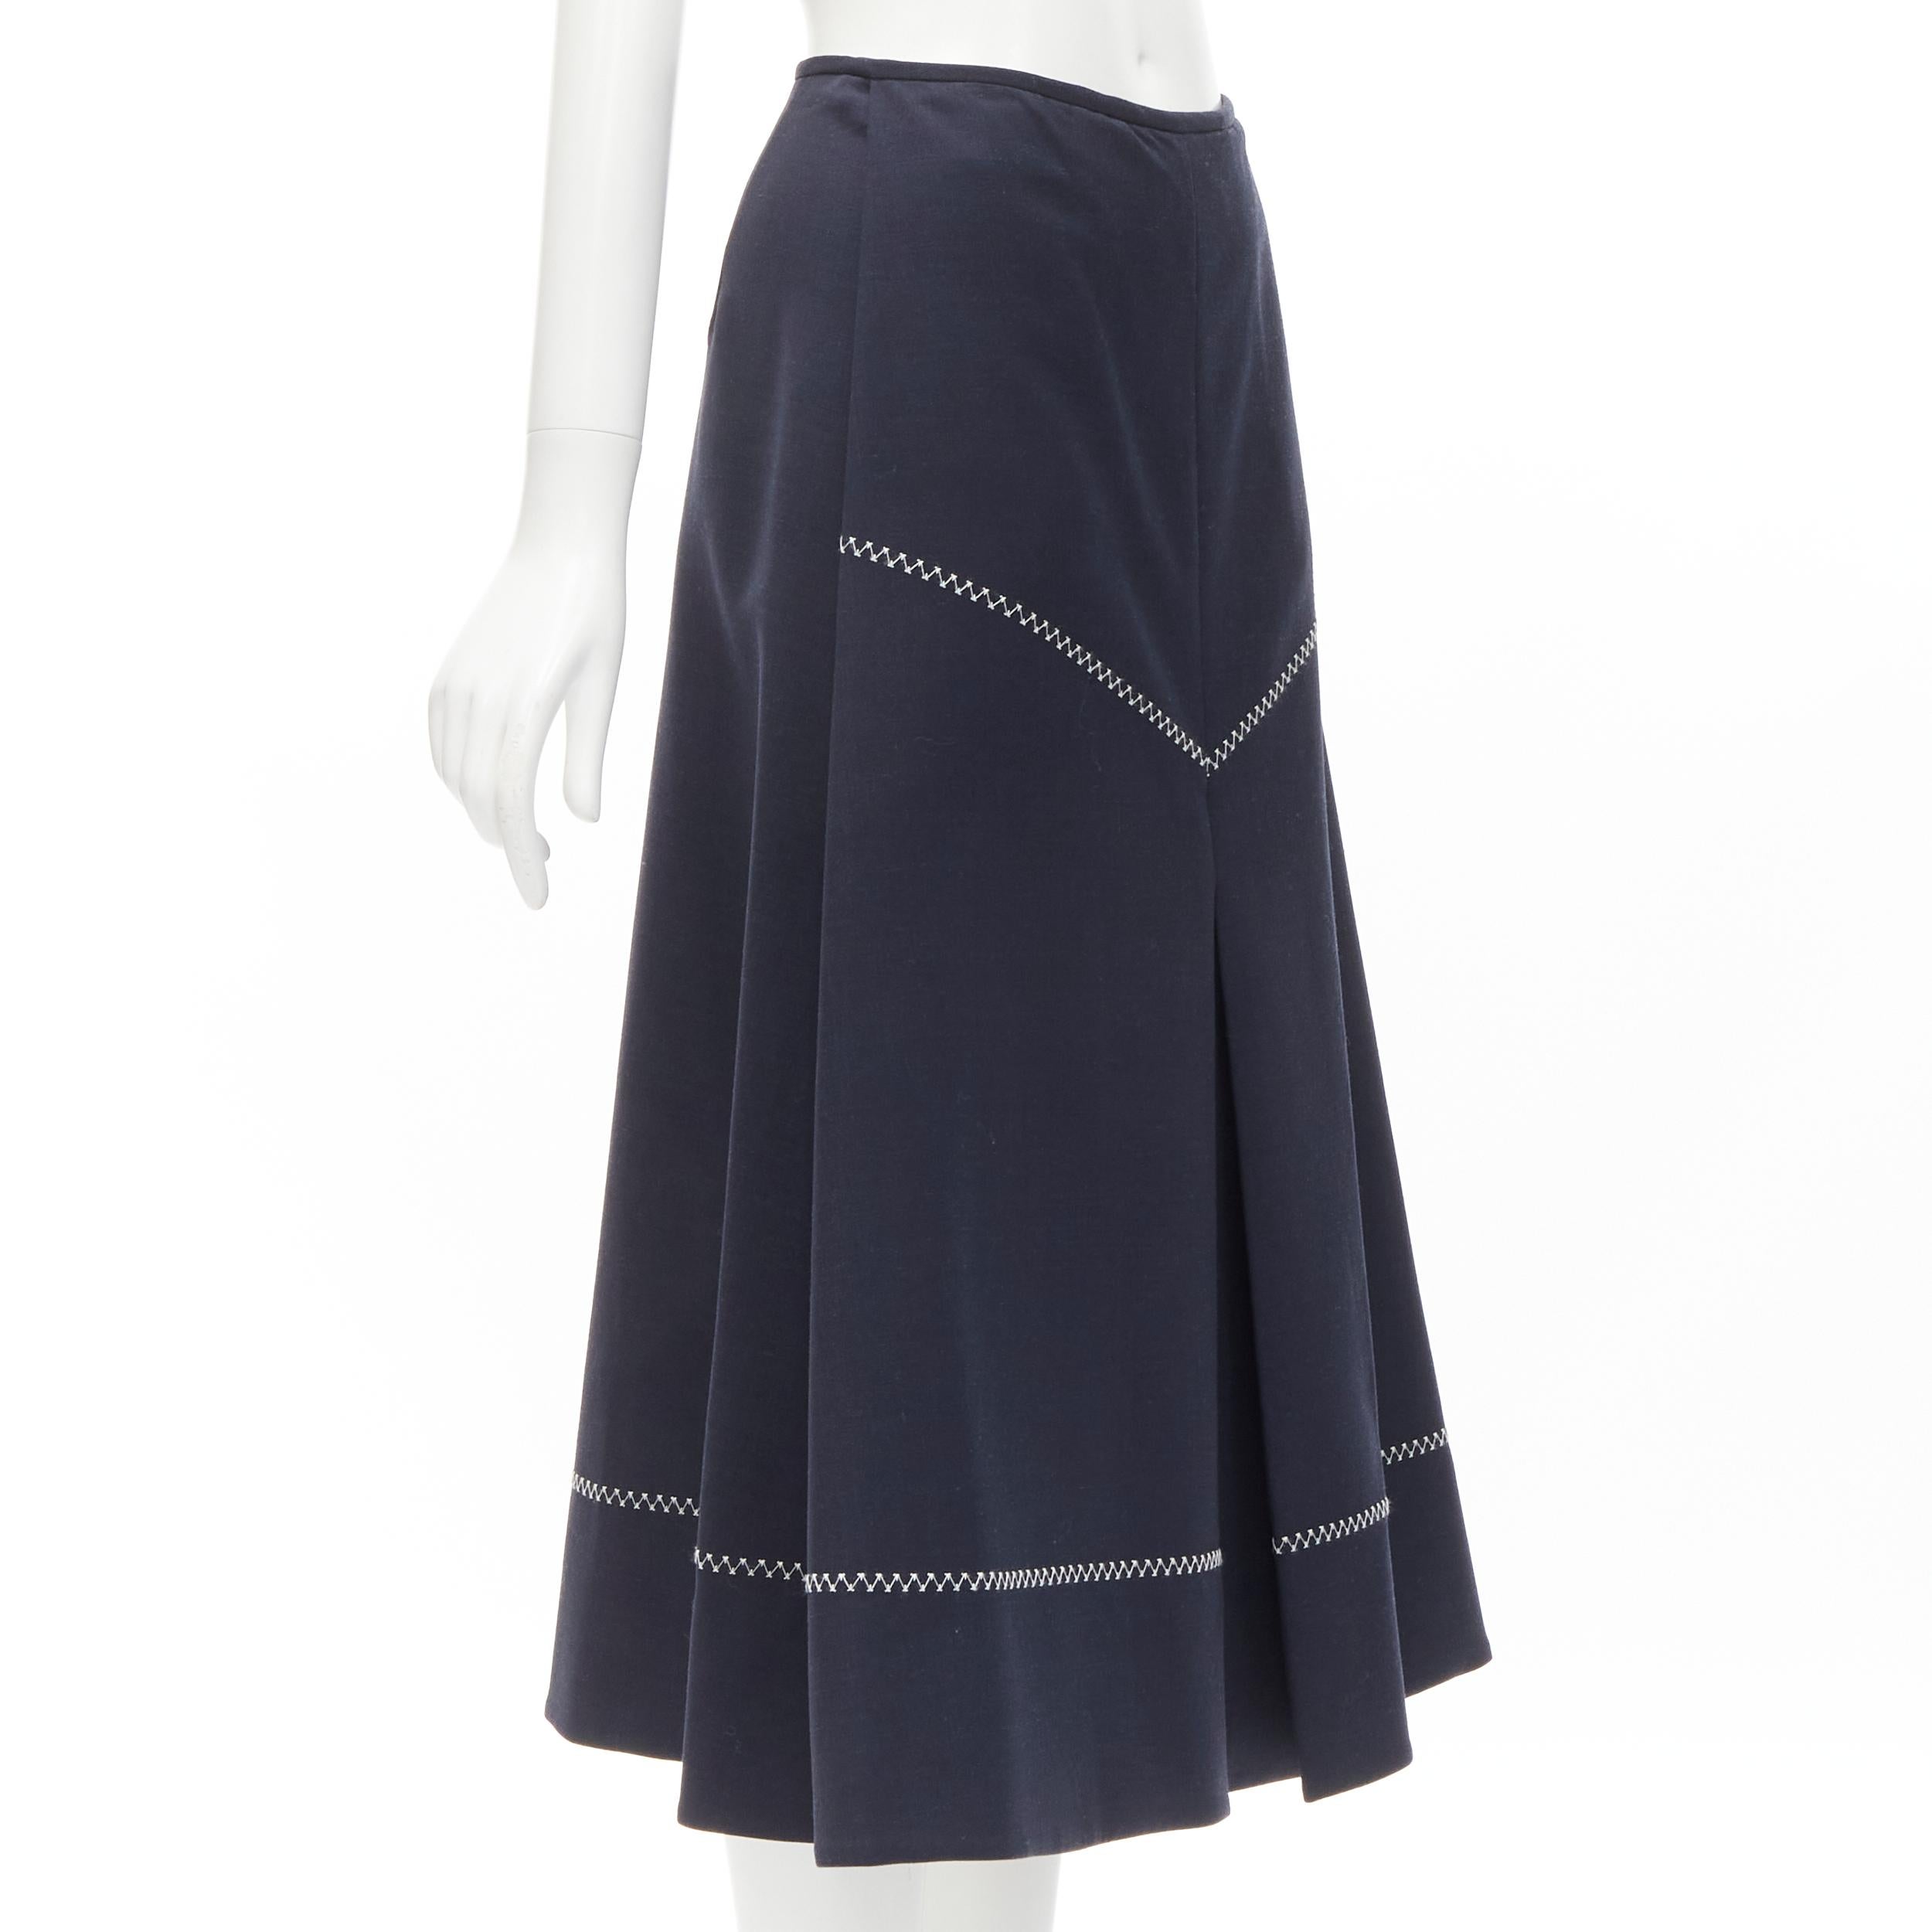 ELLERY navy polyester wool white cross hatch stitching flared skirt US2 XS
Brand: Ellery
Material: Polyester
Color: Navy
Pattern: Solid
Closure: Zip
Extra Detail: Side pockets.
Made in: Australia

CONDITION:
Condition: Excellent, this item was